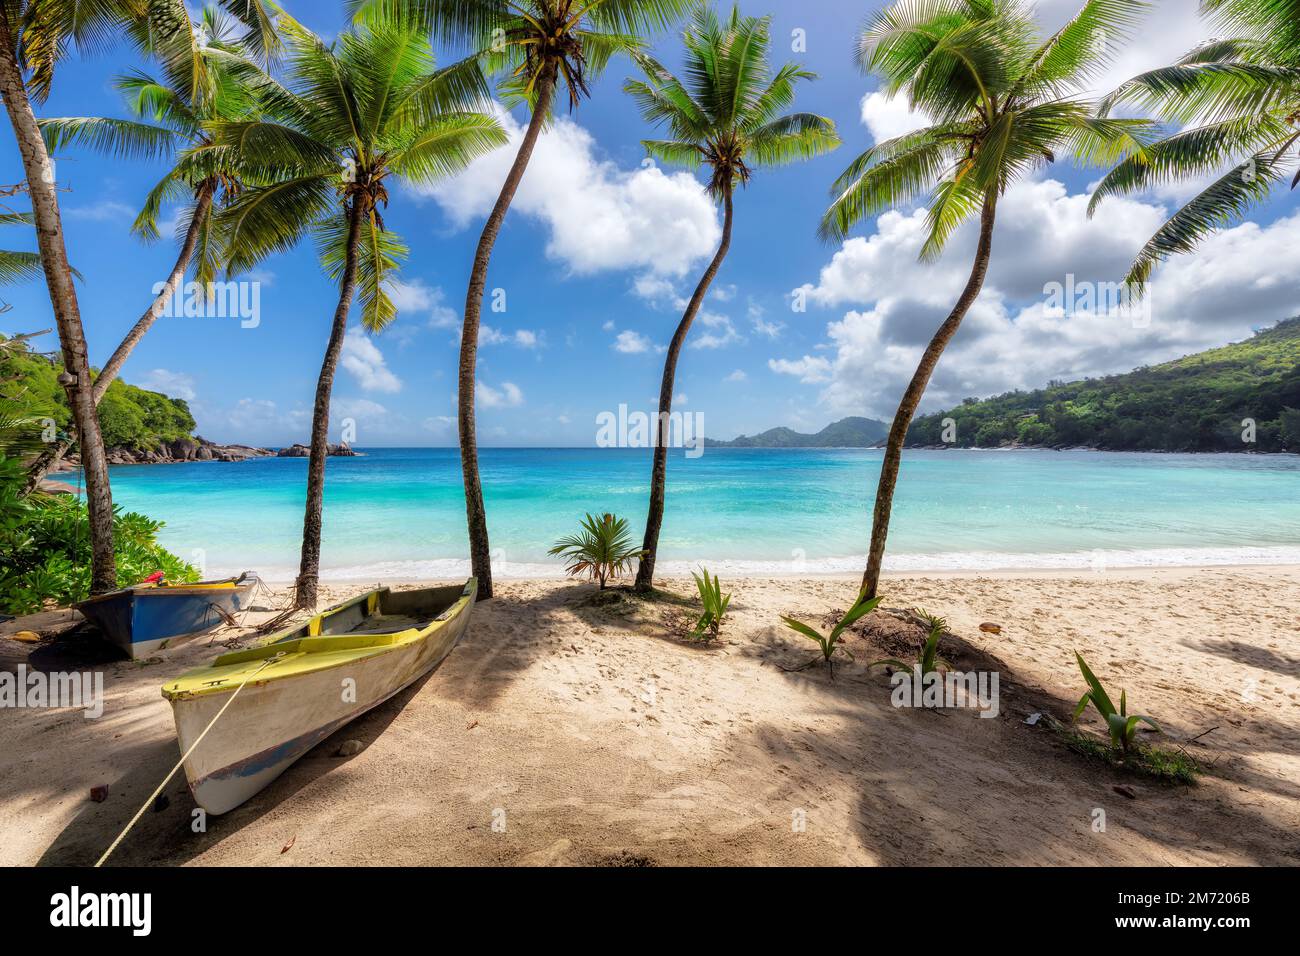 Coco palm trees and a fishing boats in sandy beach on Paradise island. Stock Photo